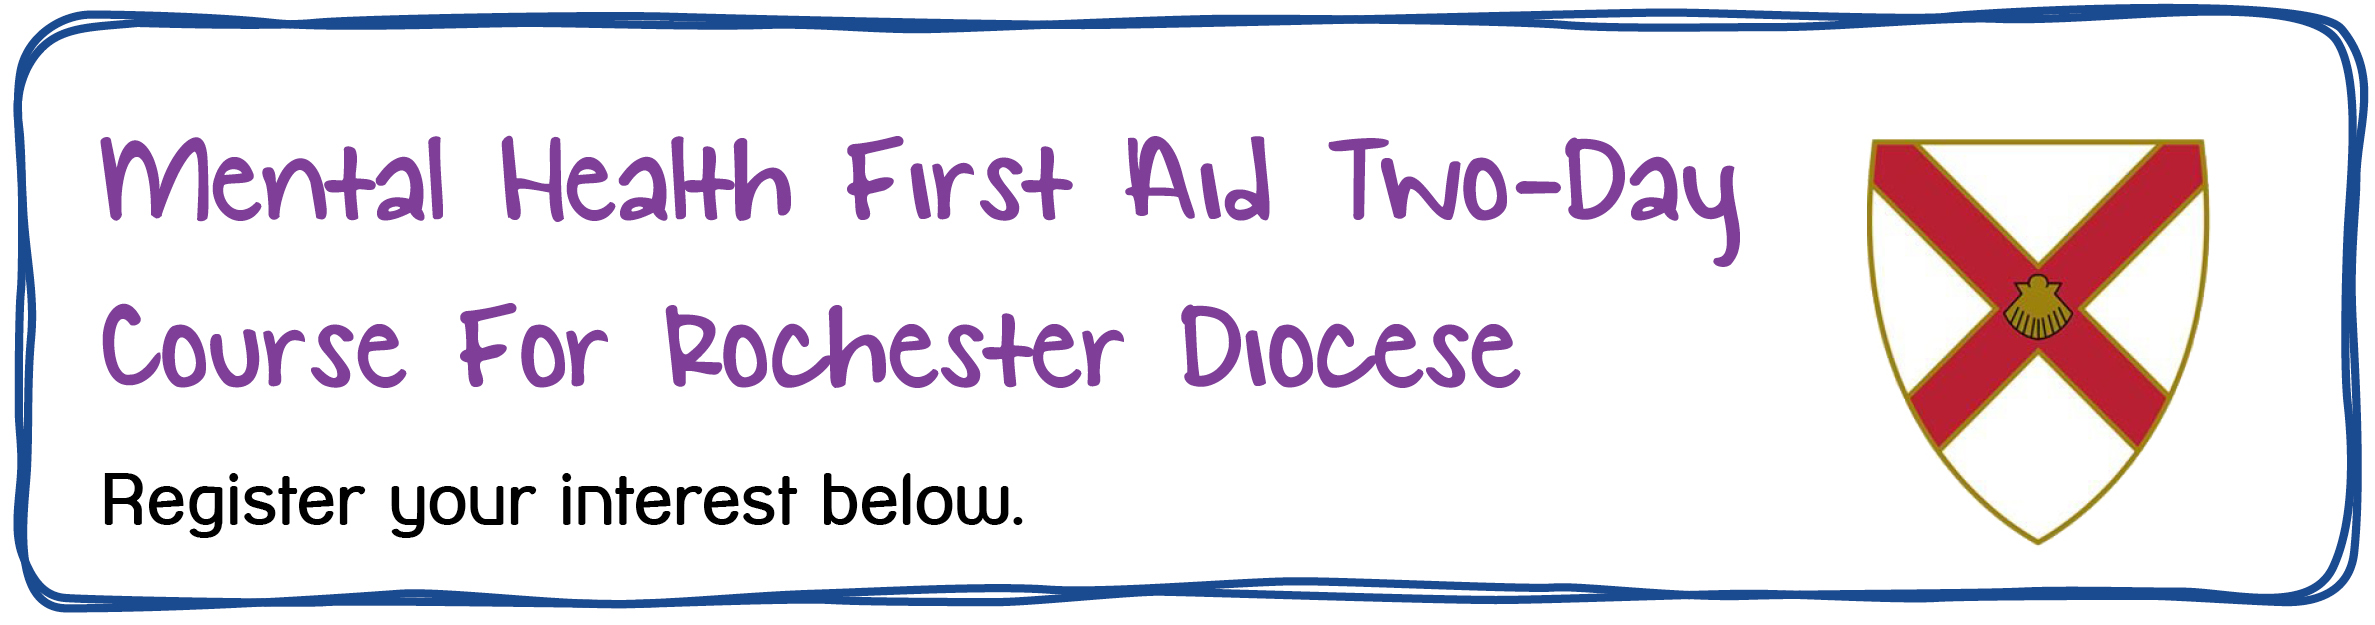 Mental Health First Aid Two-Day Course For Rochester Diocese. Register your interest below.